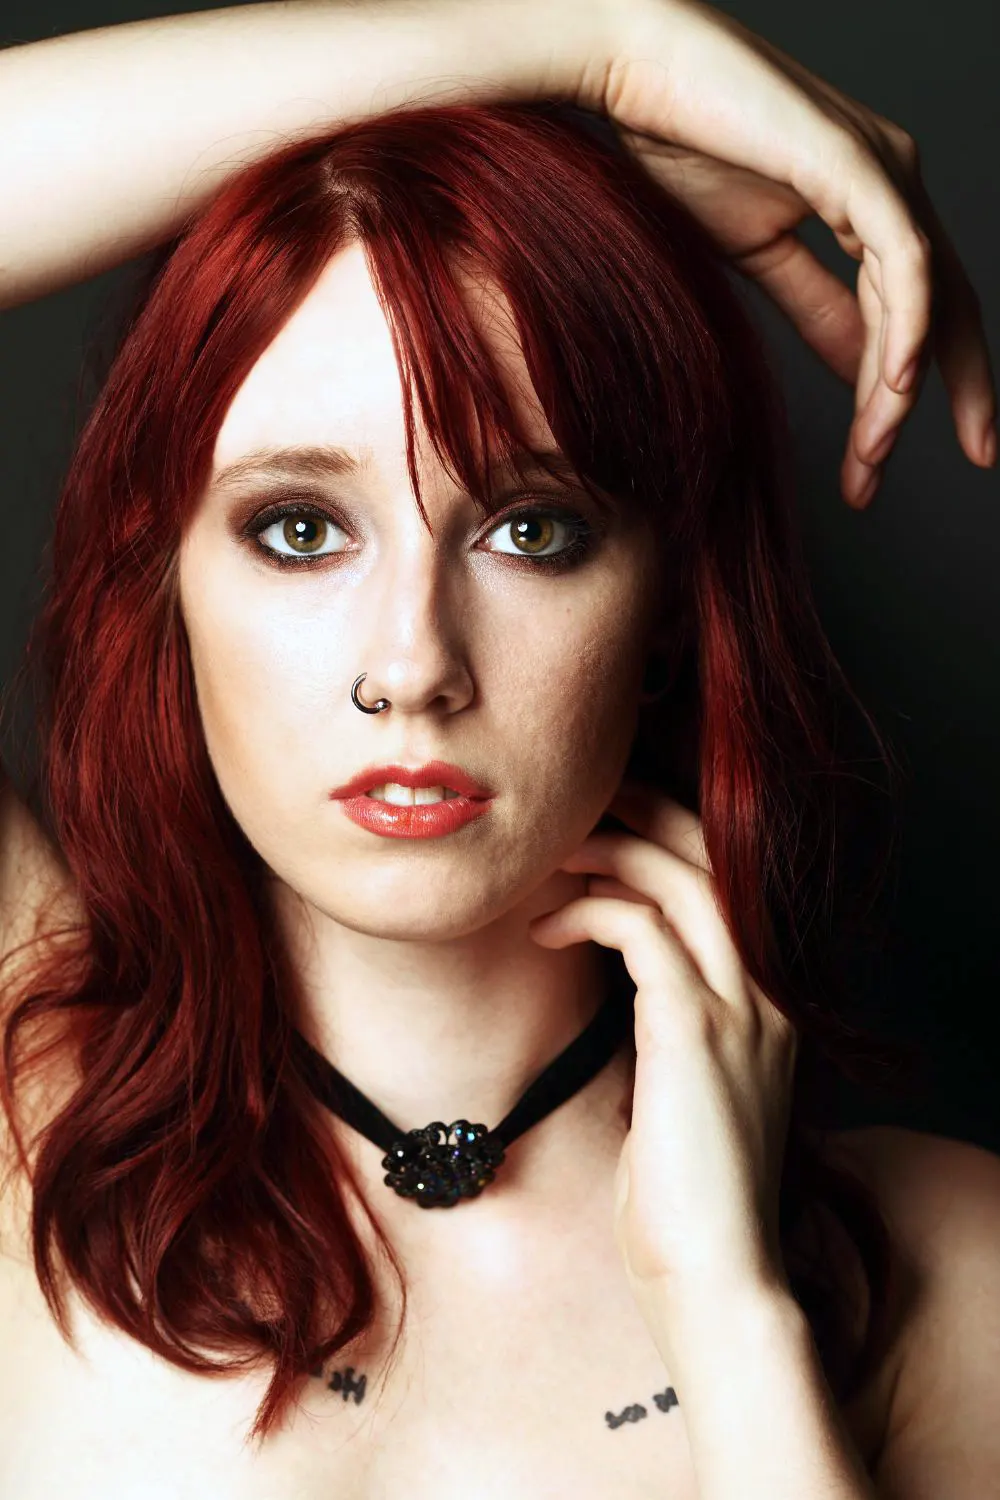 Redhead girl with nose ring